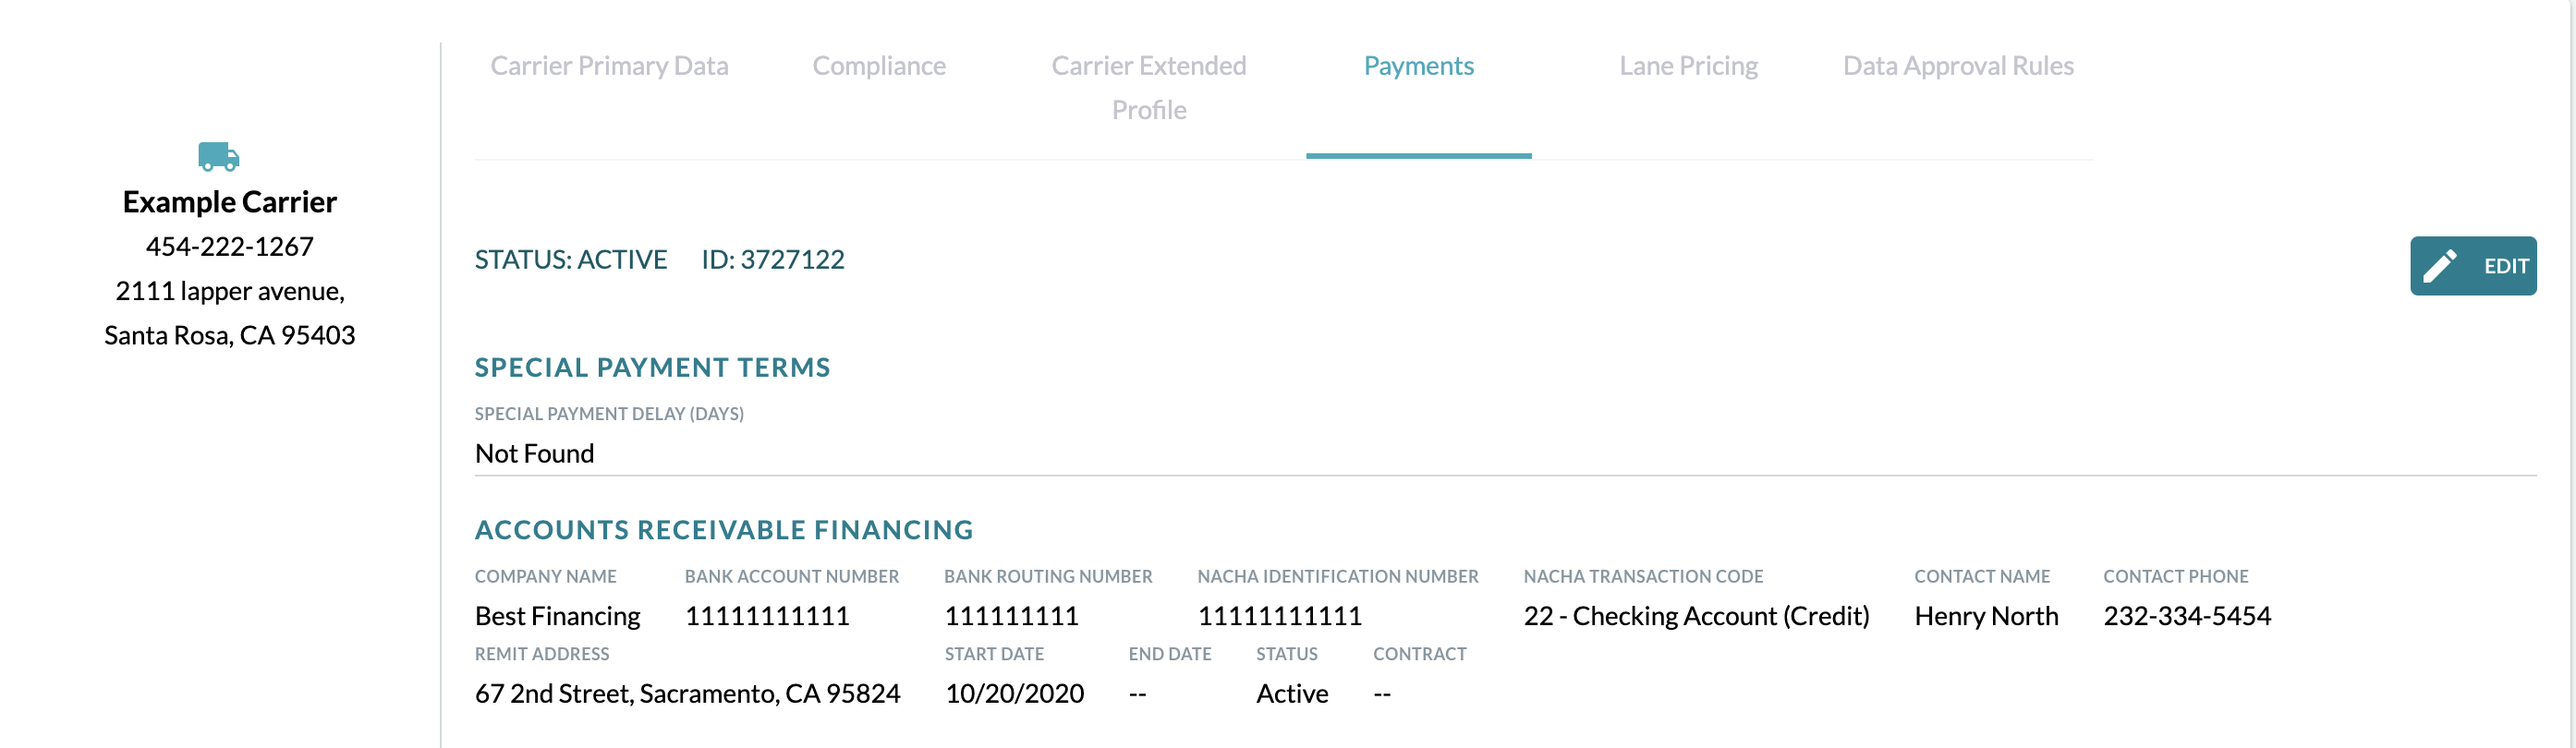 Carrier_Payments_Tab.png